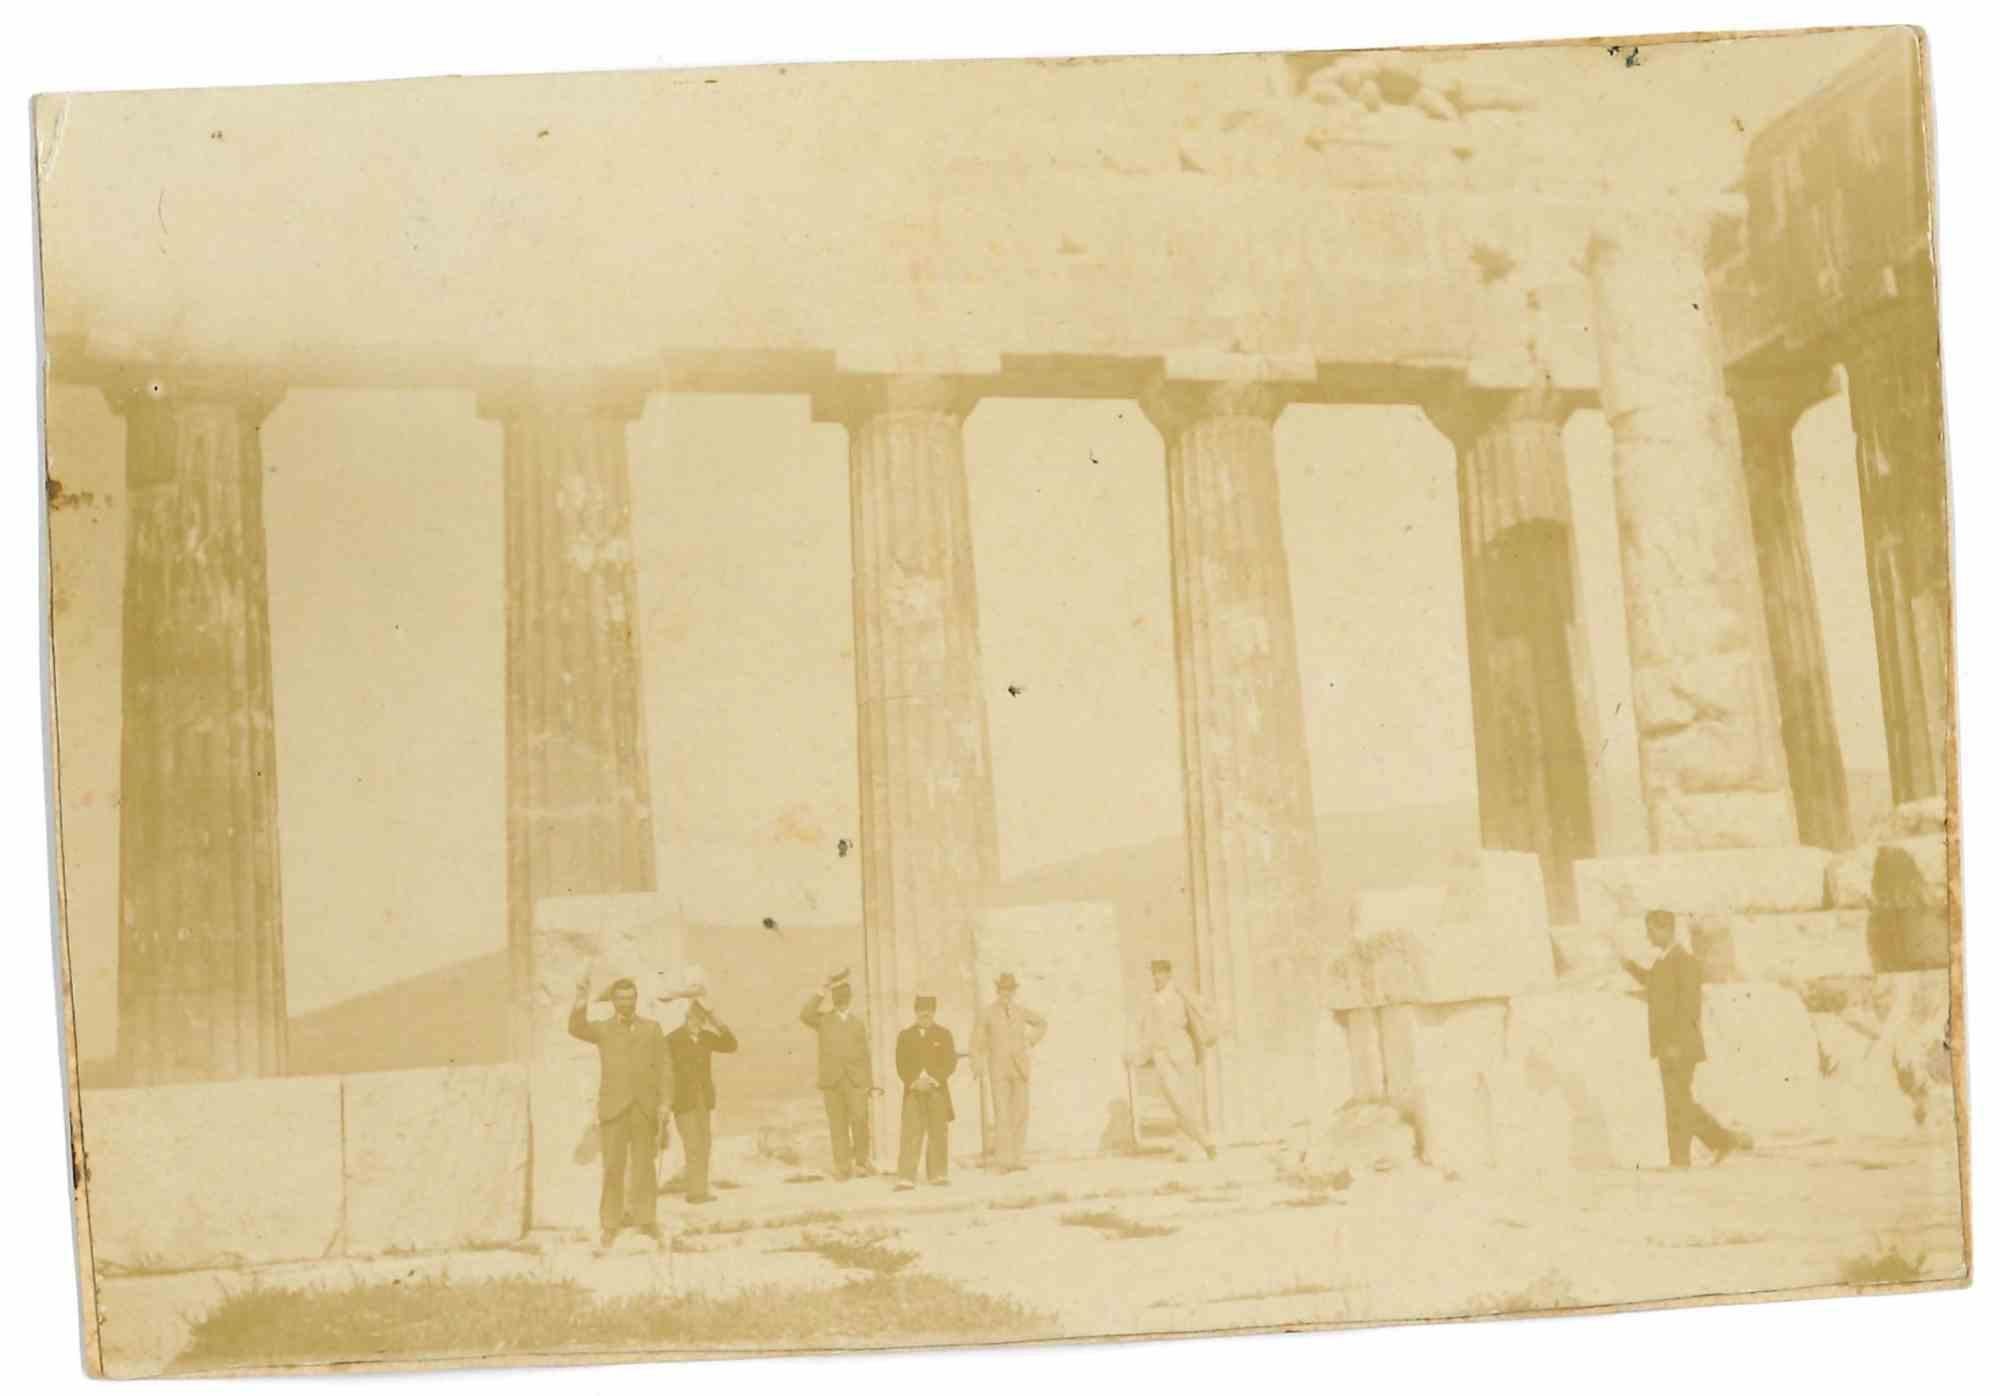 Unknown Landscape Photograph - Hellenistic Columns  and Tourist - The Old Days -  The Early 20th century